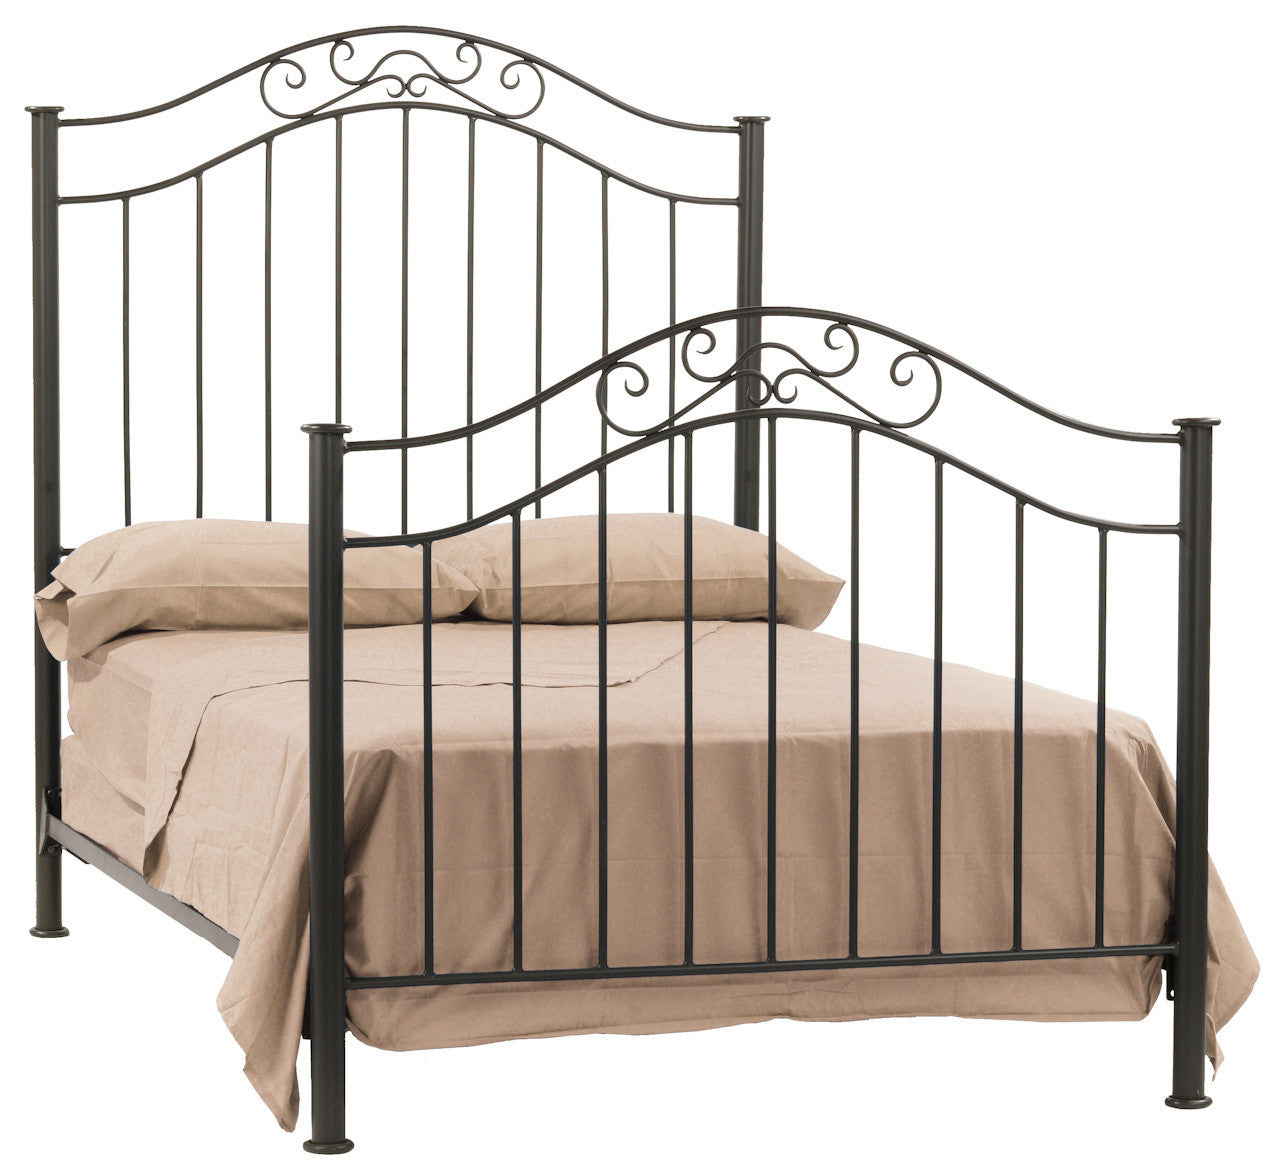 Stone County Ironworks 902-294 Richmond Full Bed